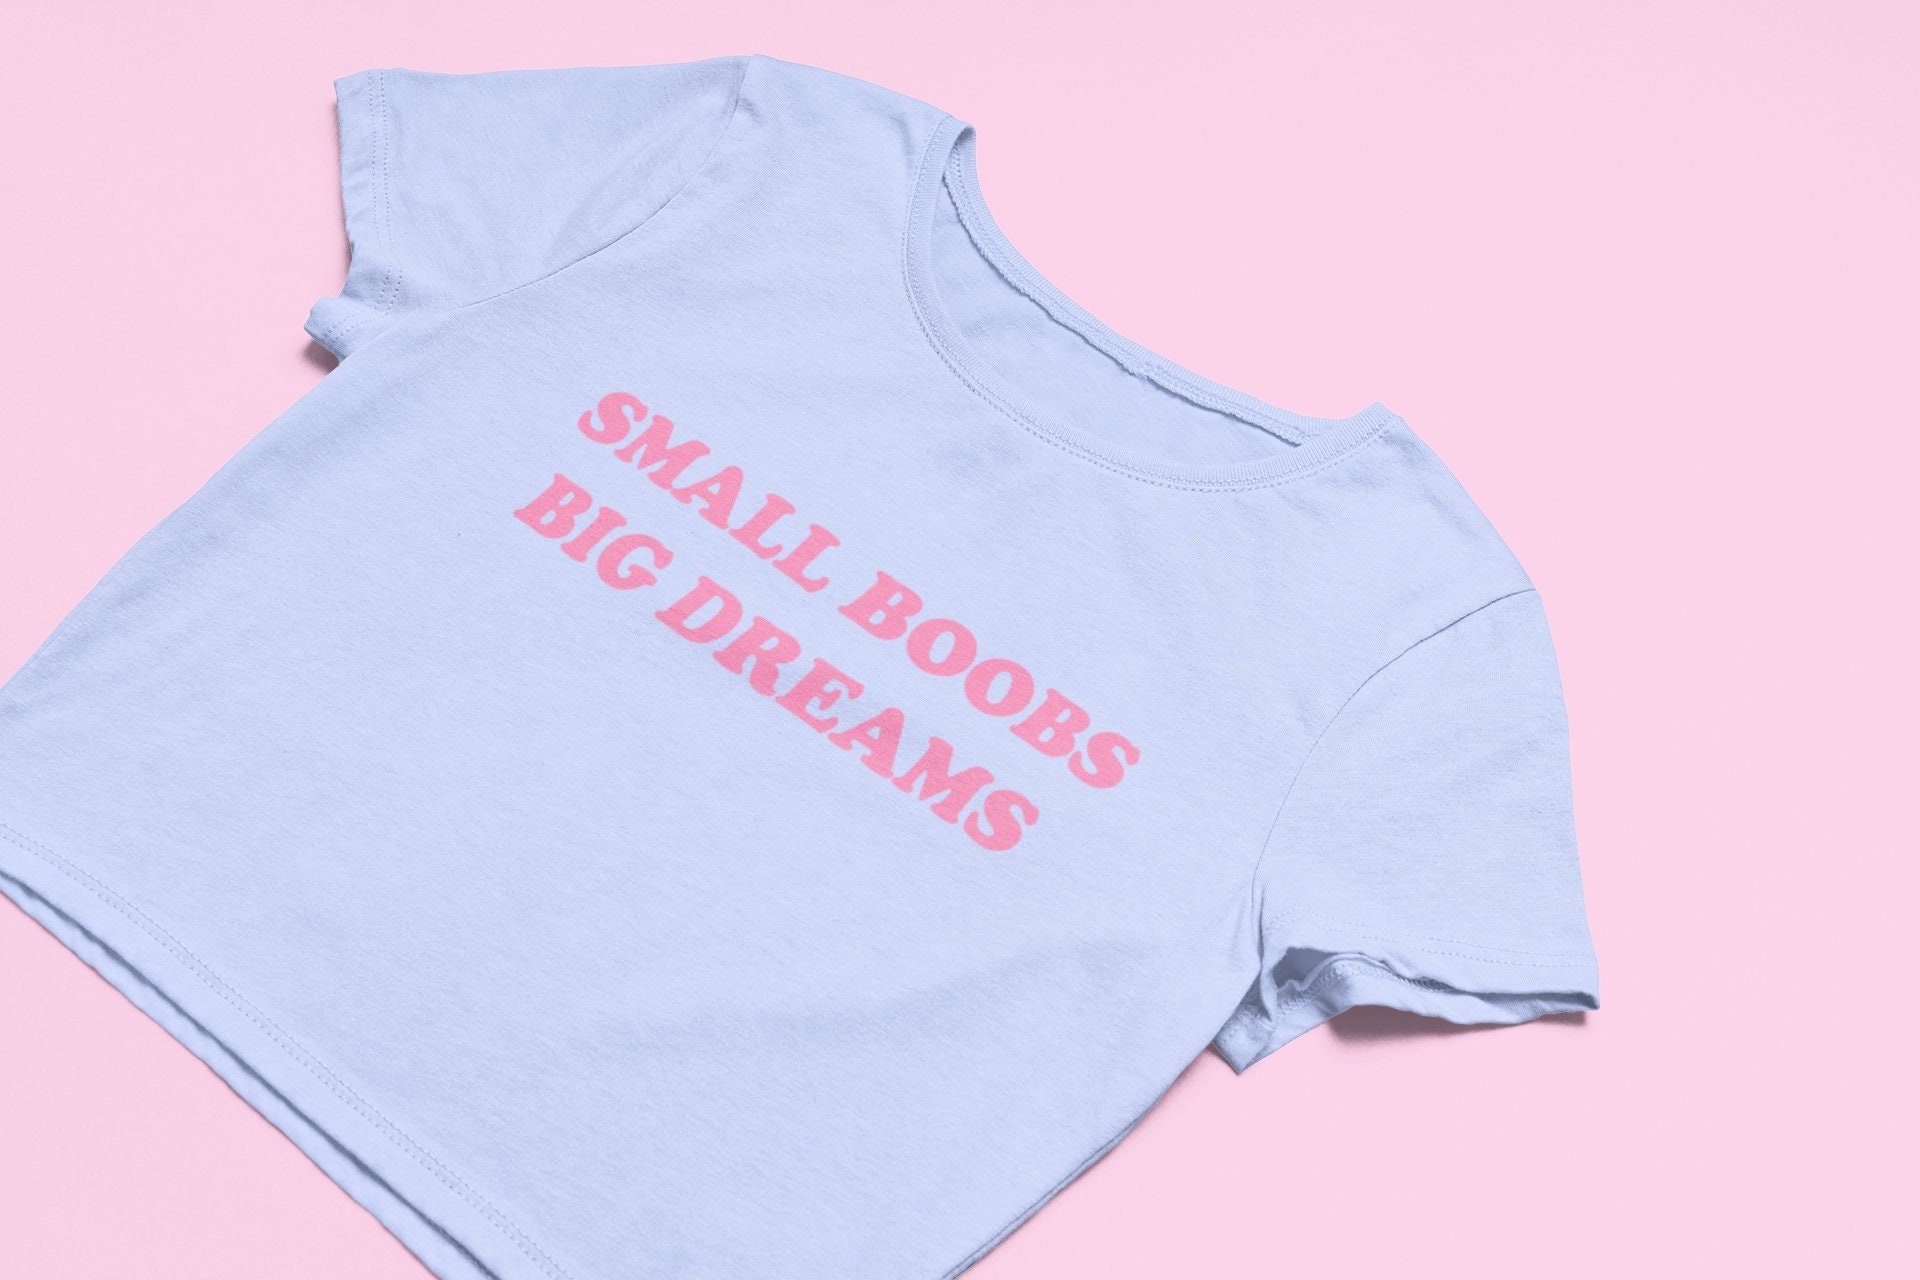 small tits big heart <3 baby tee – Hoes For Clothes